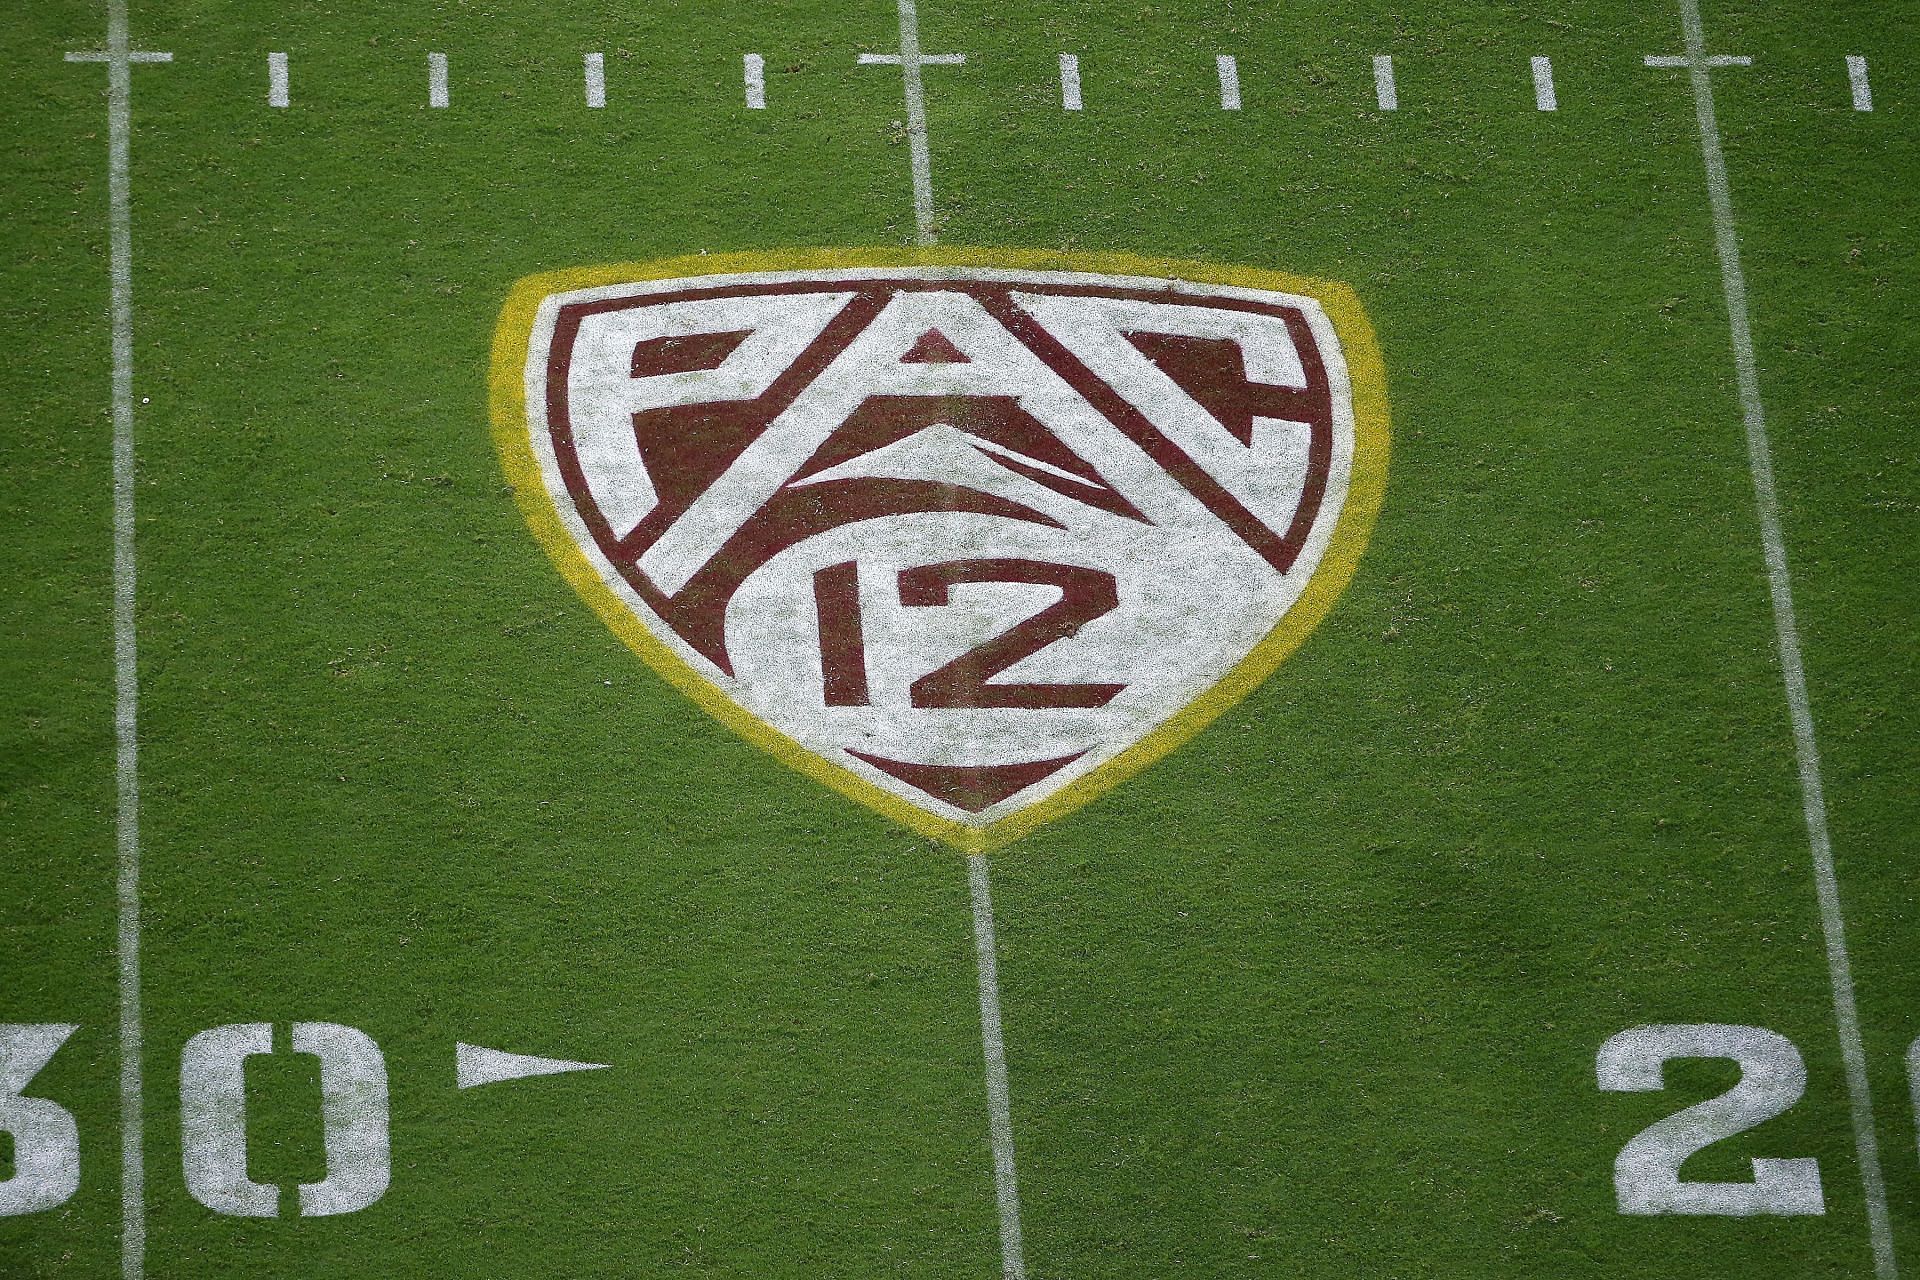 Where did Pac12 teams go? 2024 conference realignment for the Pacific